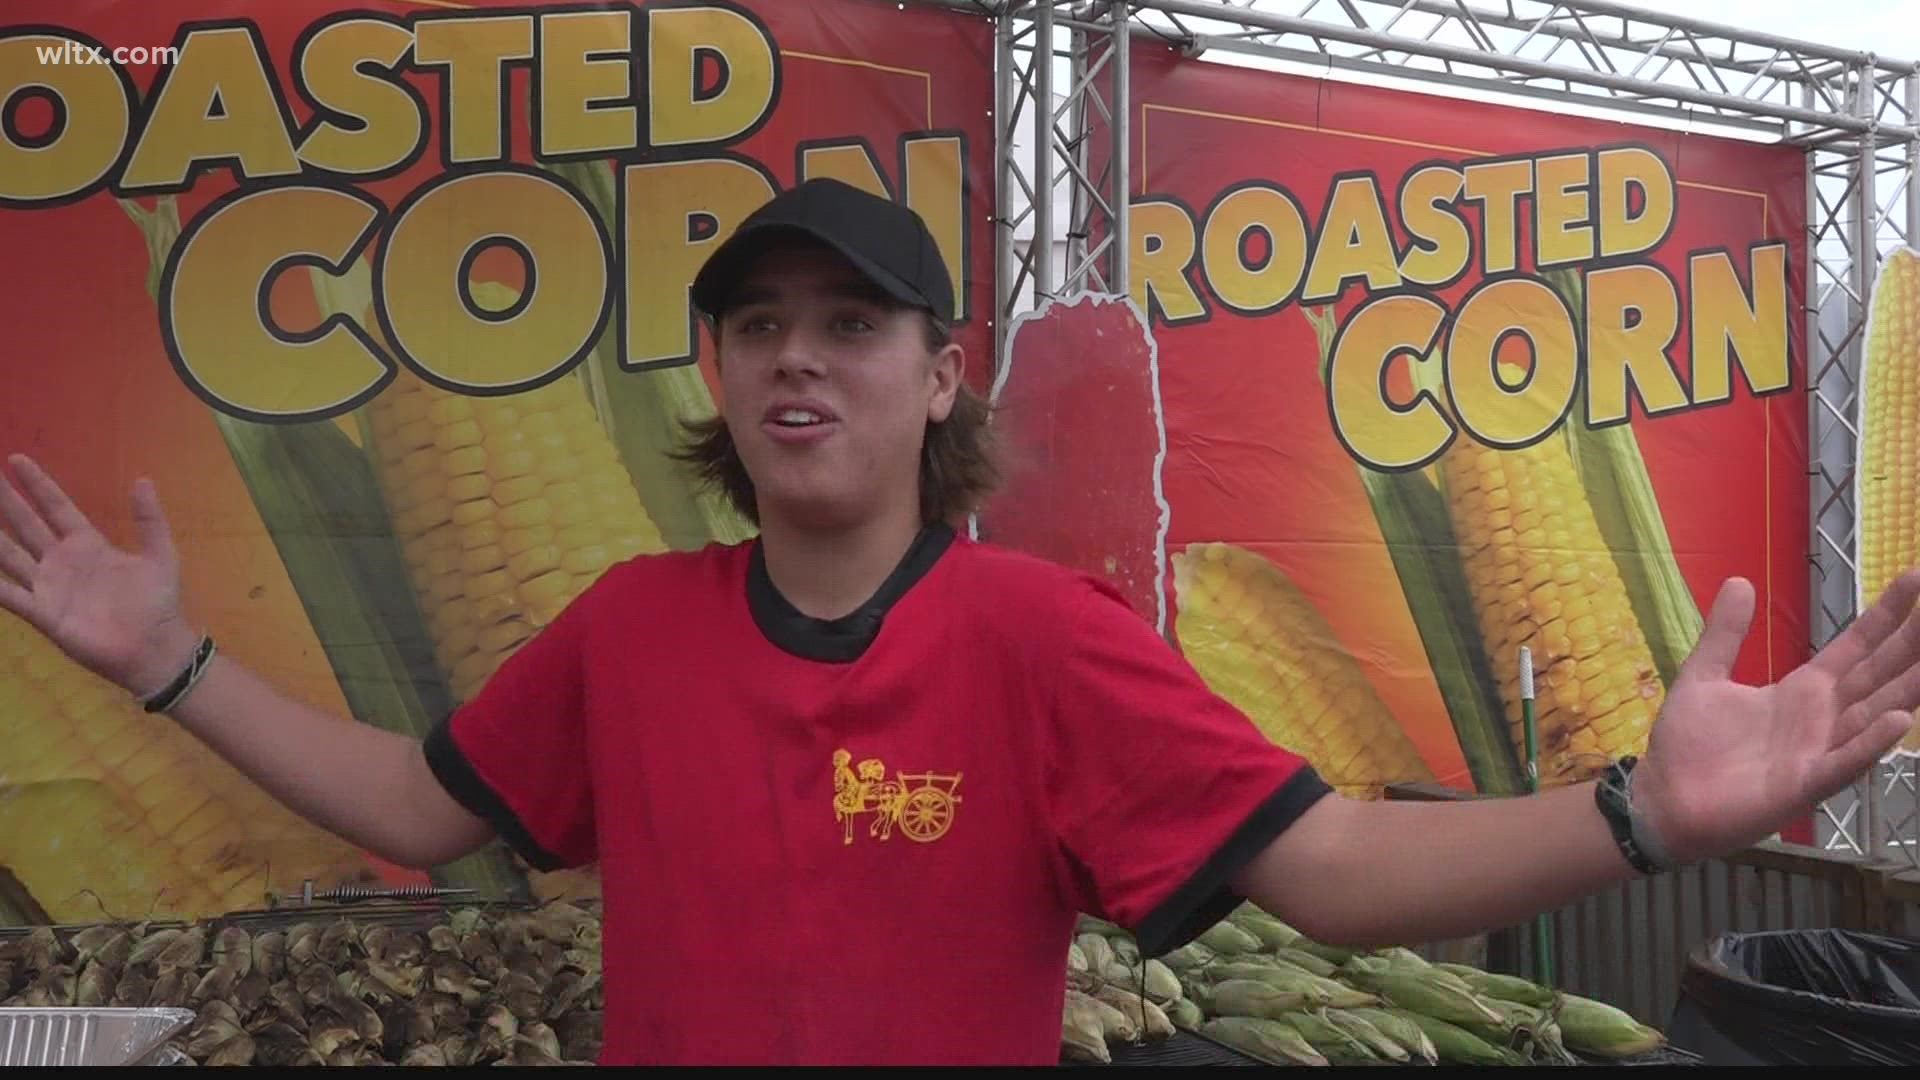 Roasted corn is one of the most popular food stands at the South Carolina State Fair for good reason.